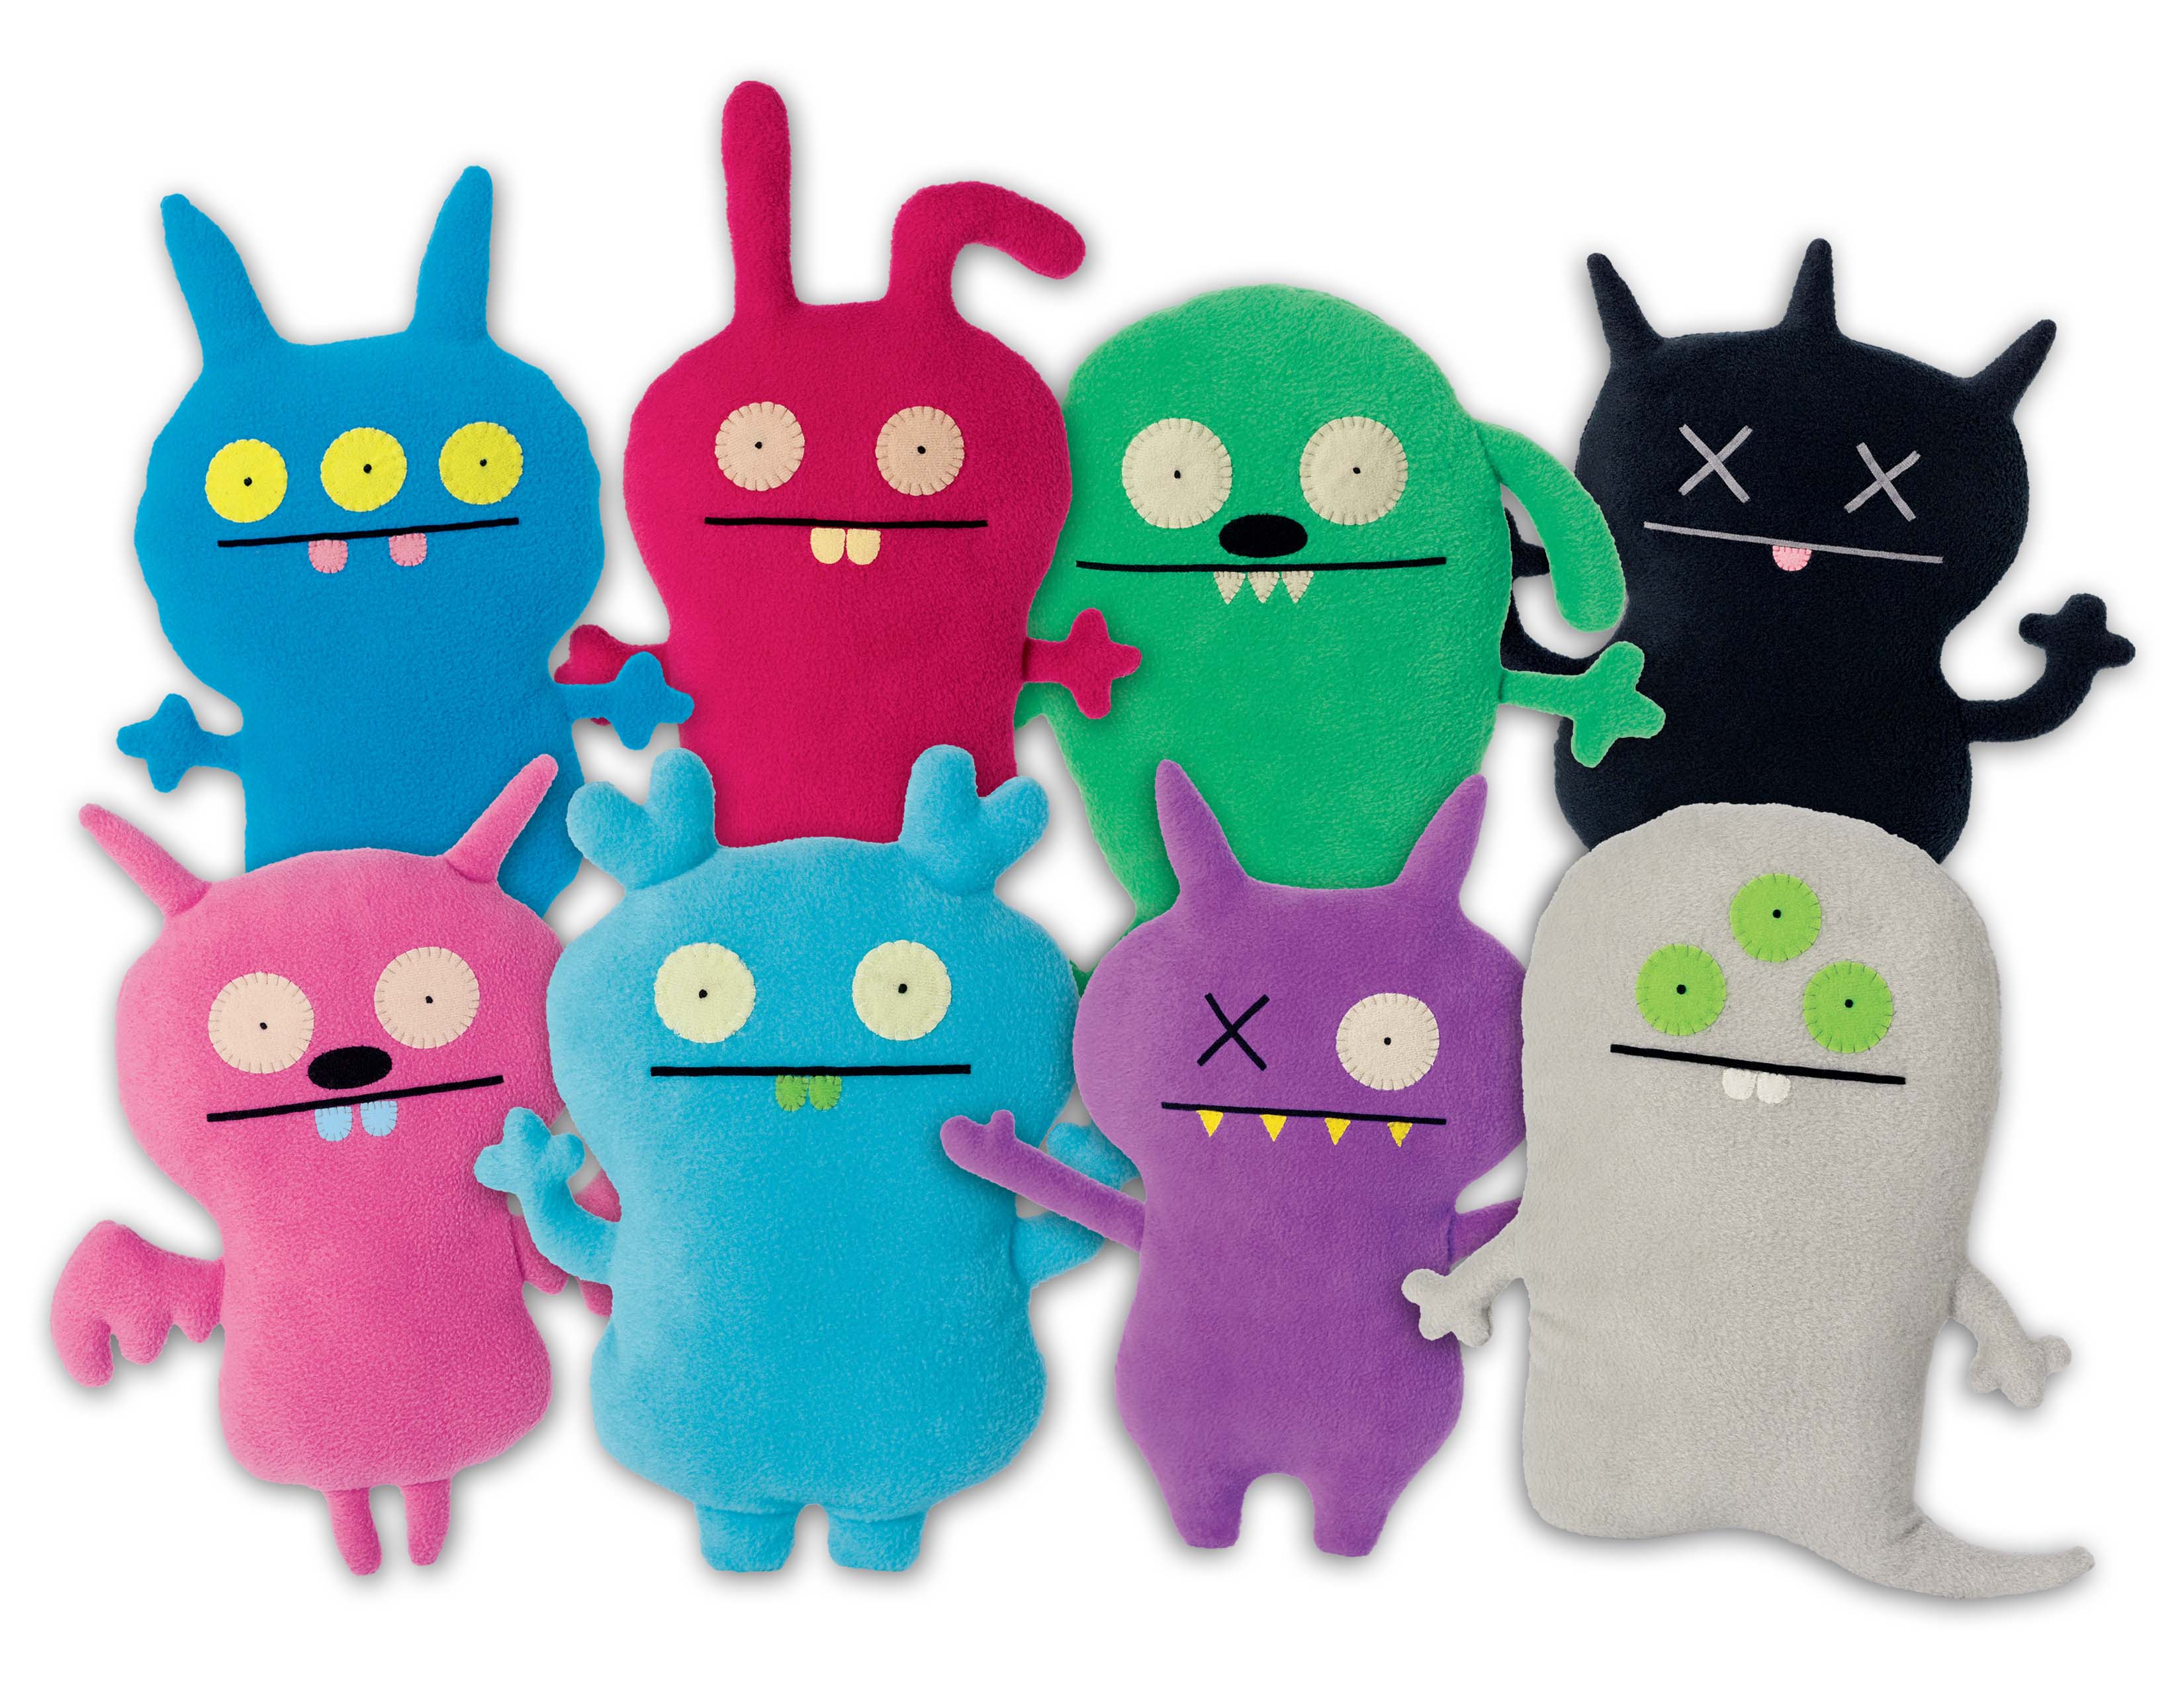 Robert Rodriguez Directing 'Ugly Dolls' Animated Movie - Bloody Disgusting